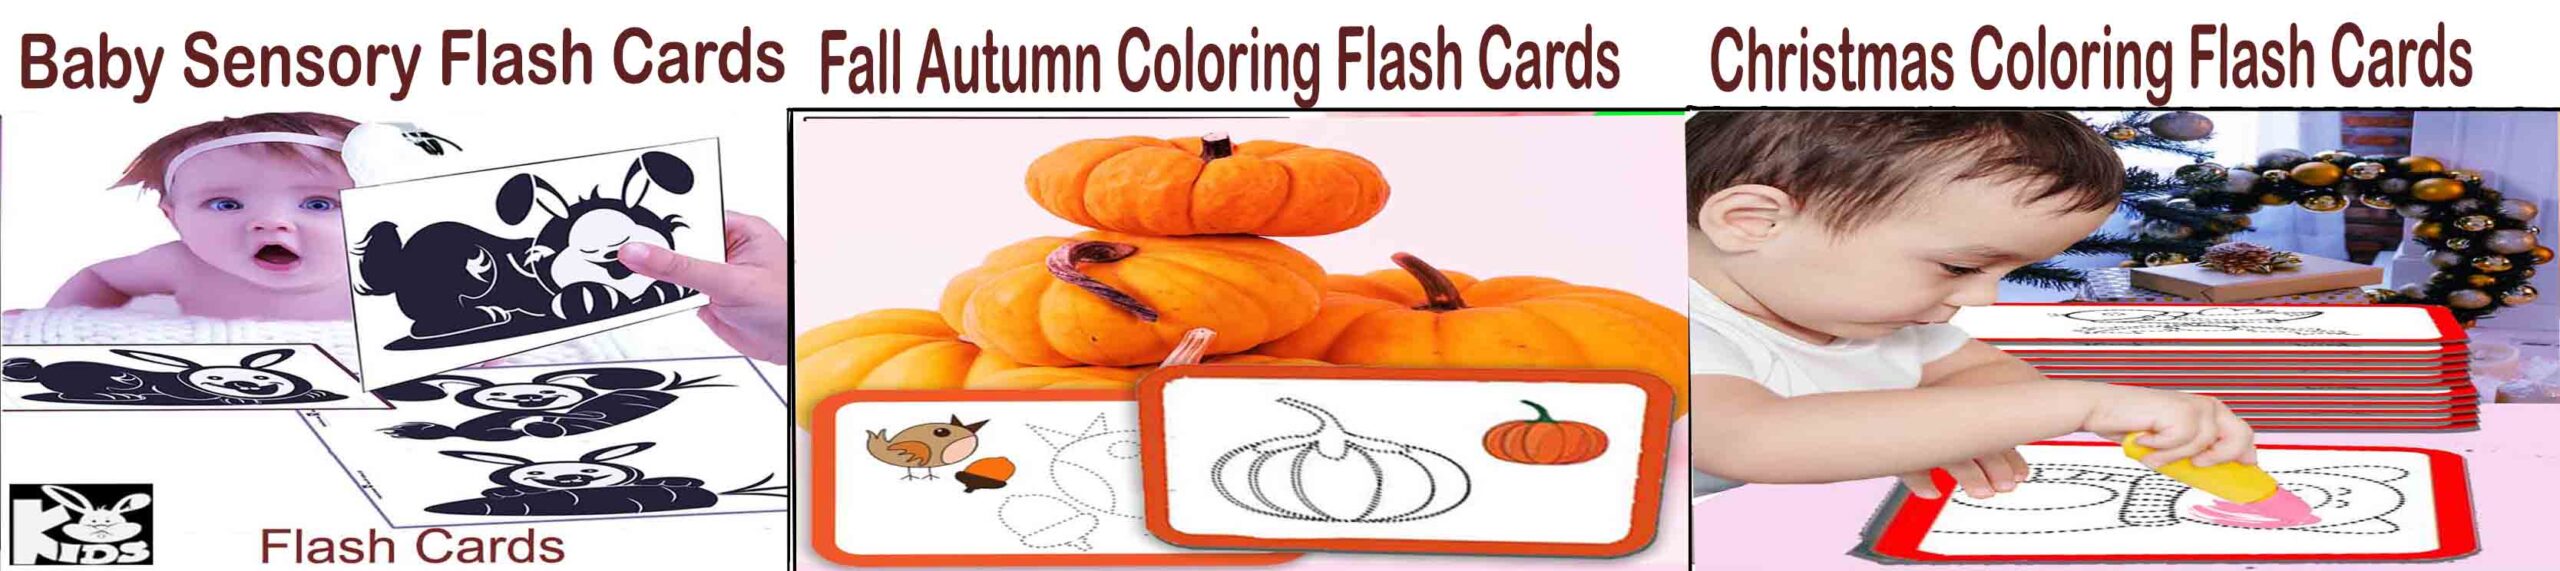 High contrast  black and white flash cards, fall autumn coloring flash cards, Christmas coloring flash cards , cursive handwriting